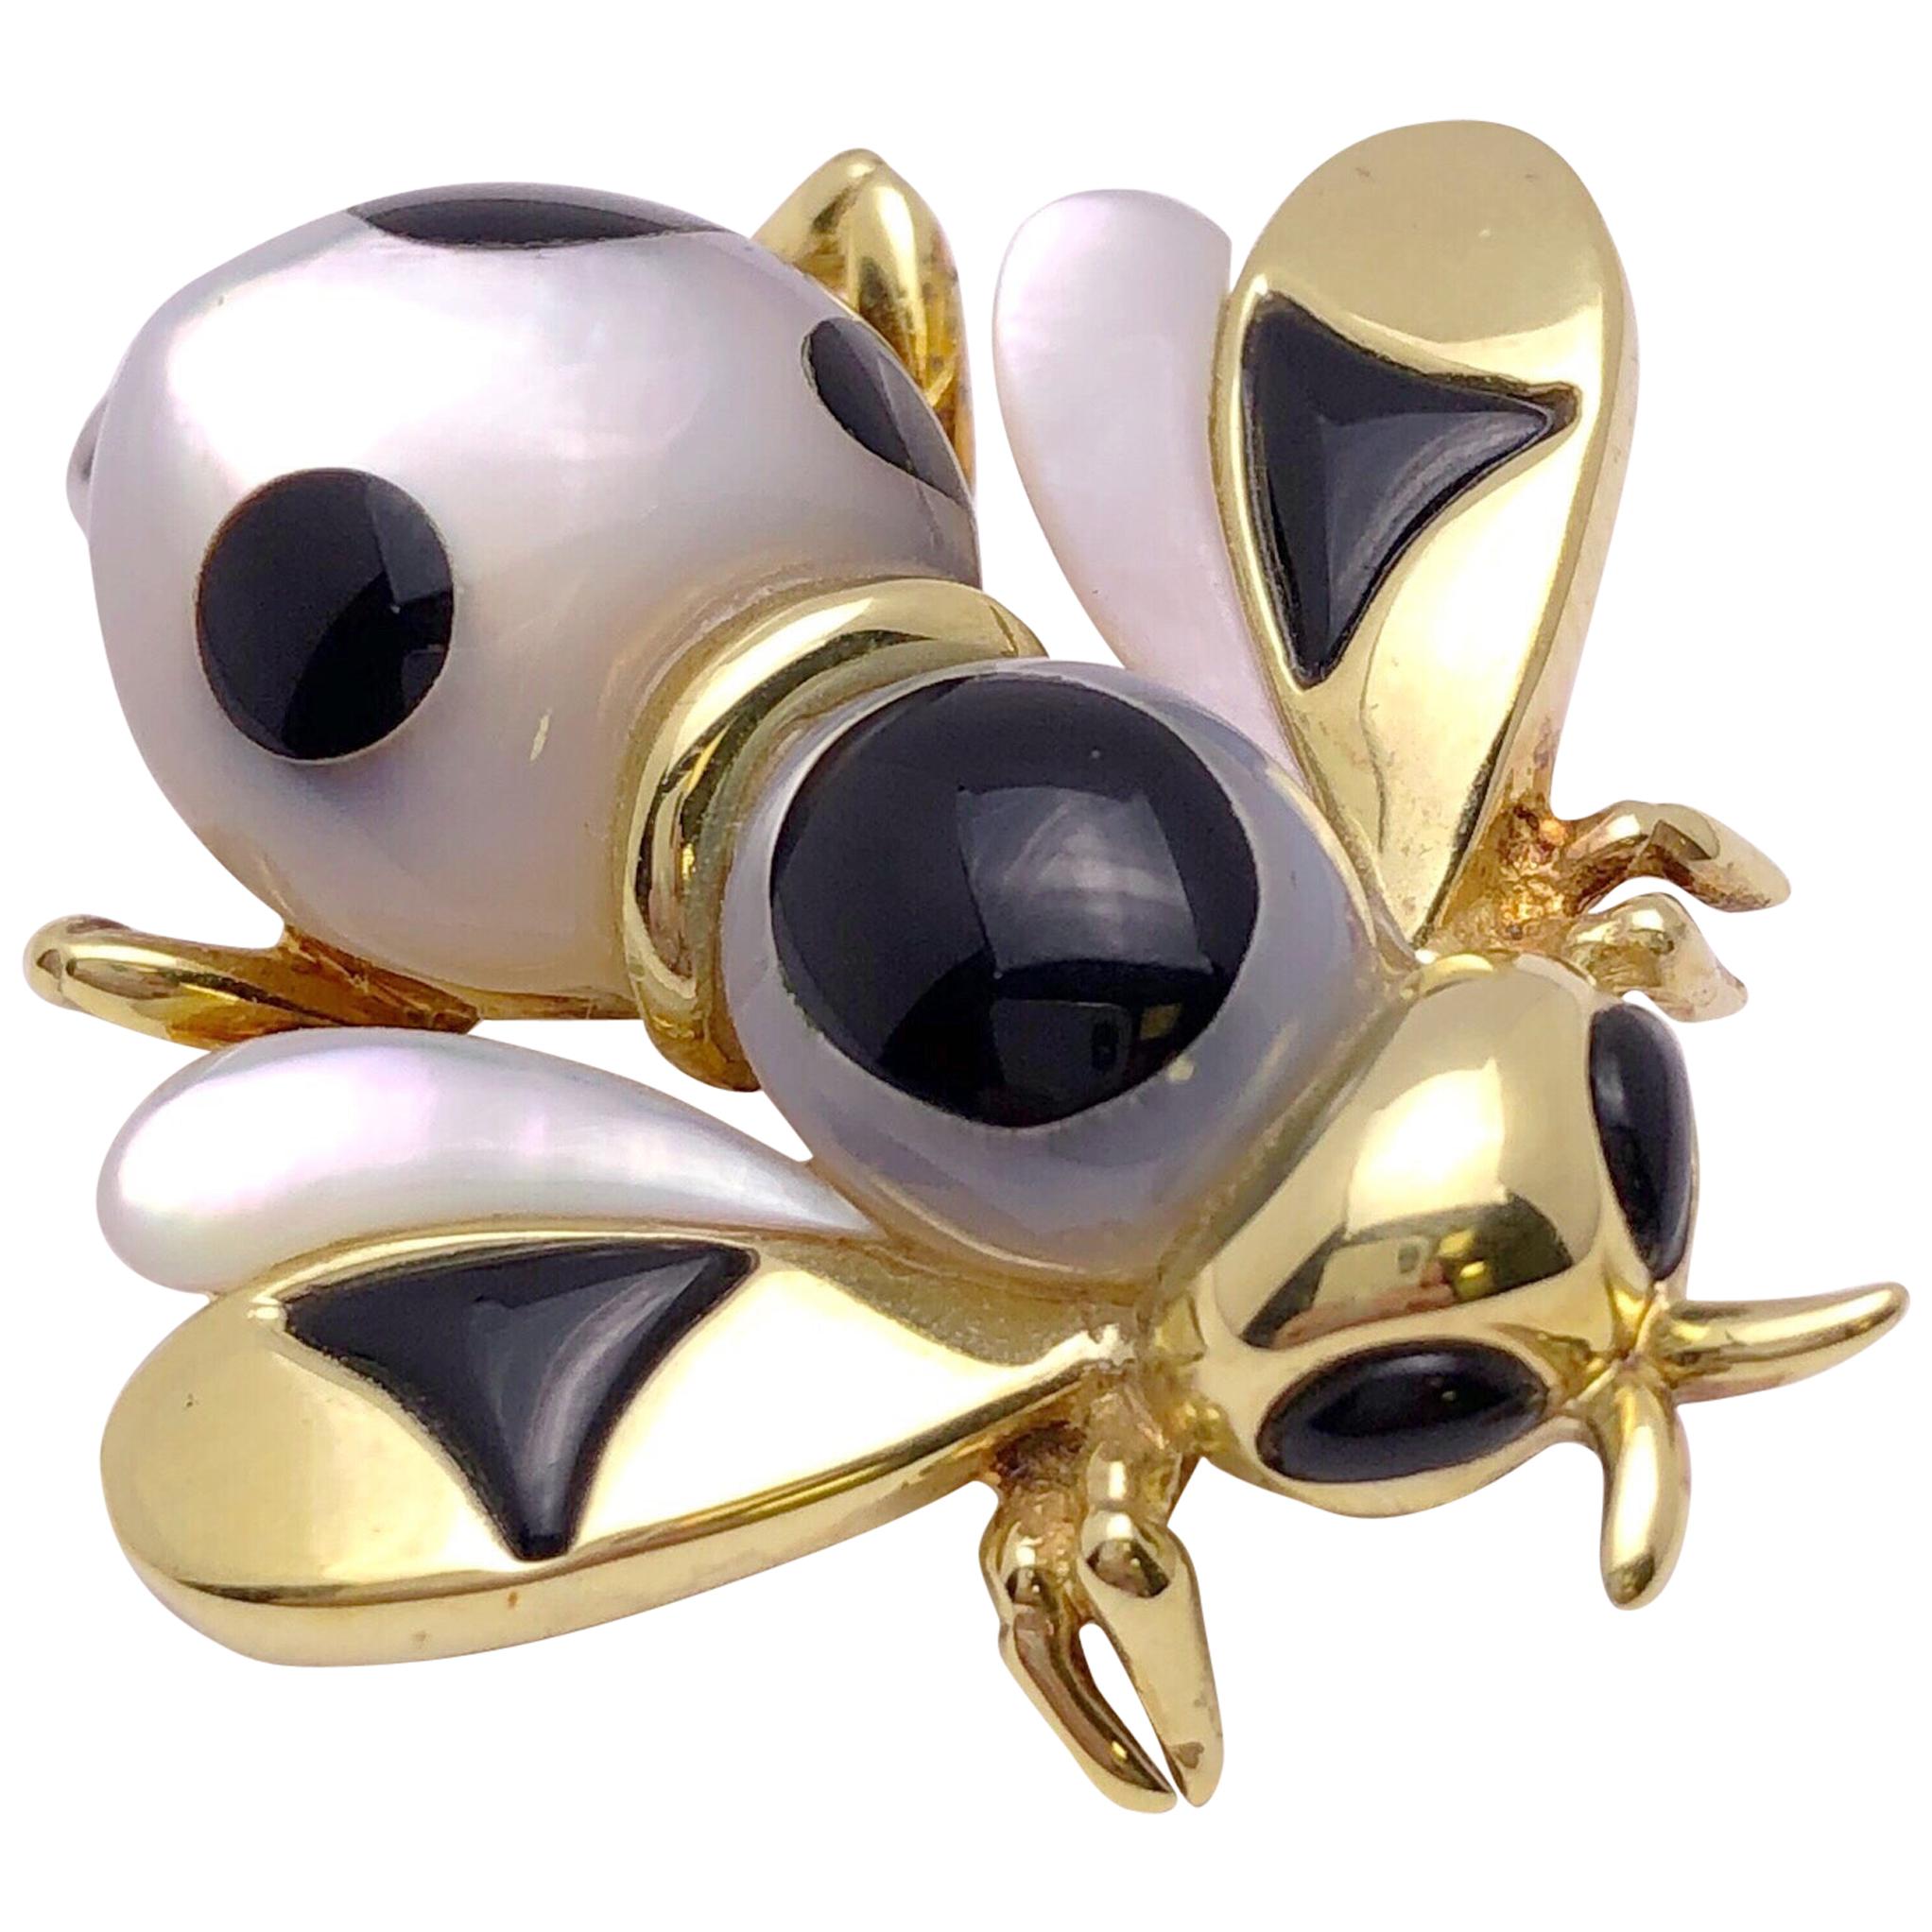 Asch Grossbardt 18 Karat Yellow Gold Bee Brooch with Onyx and Mother of Pearl